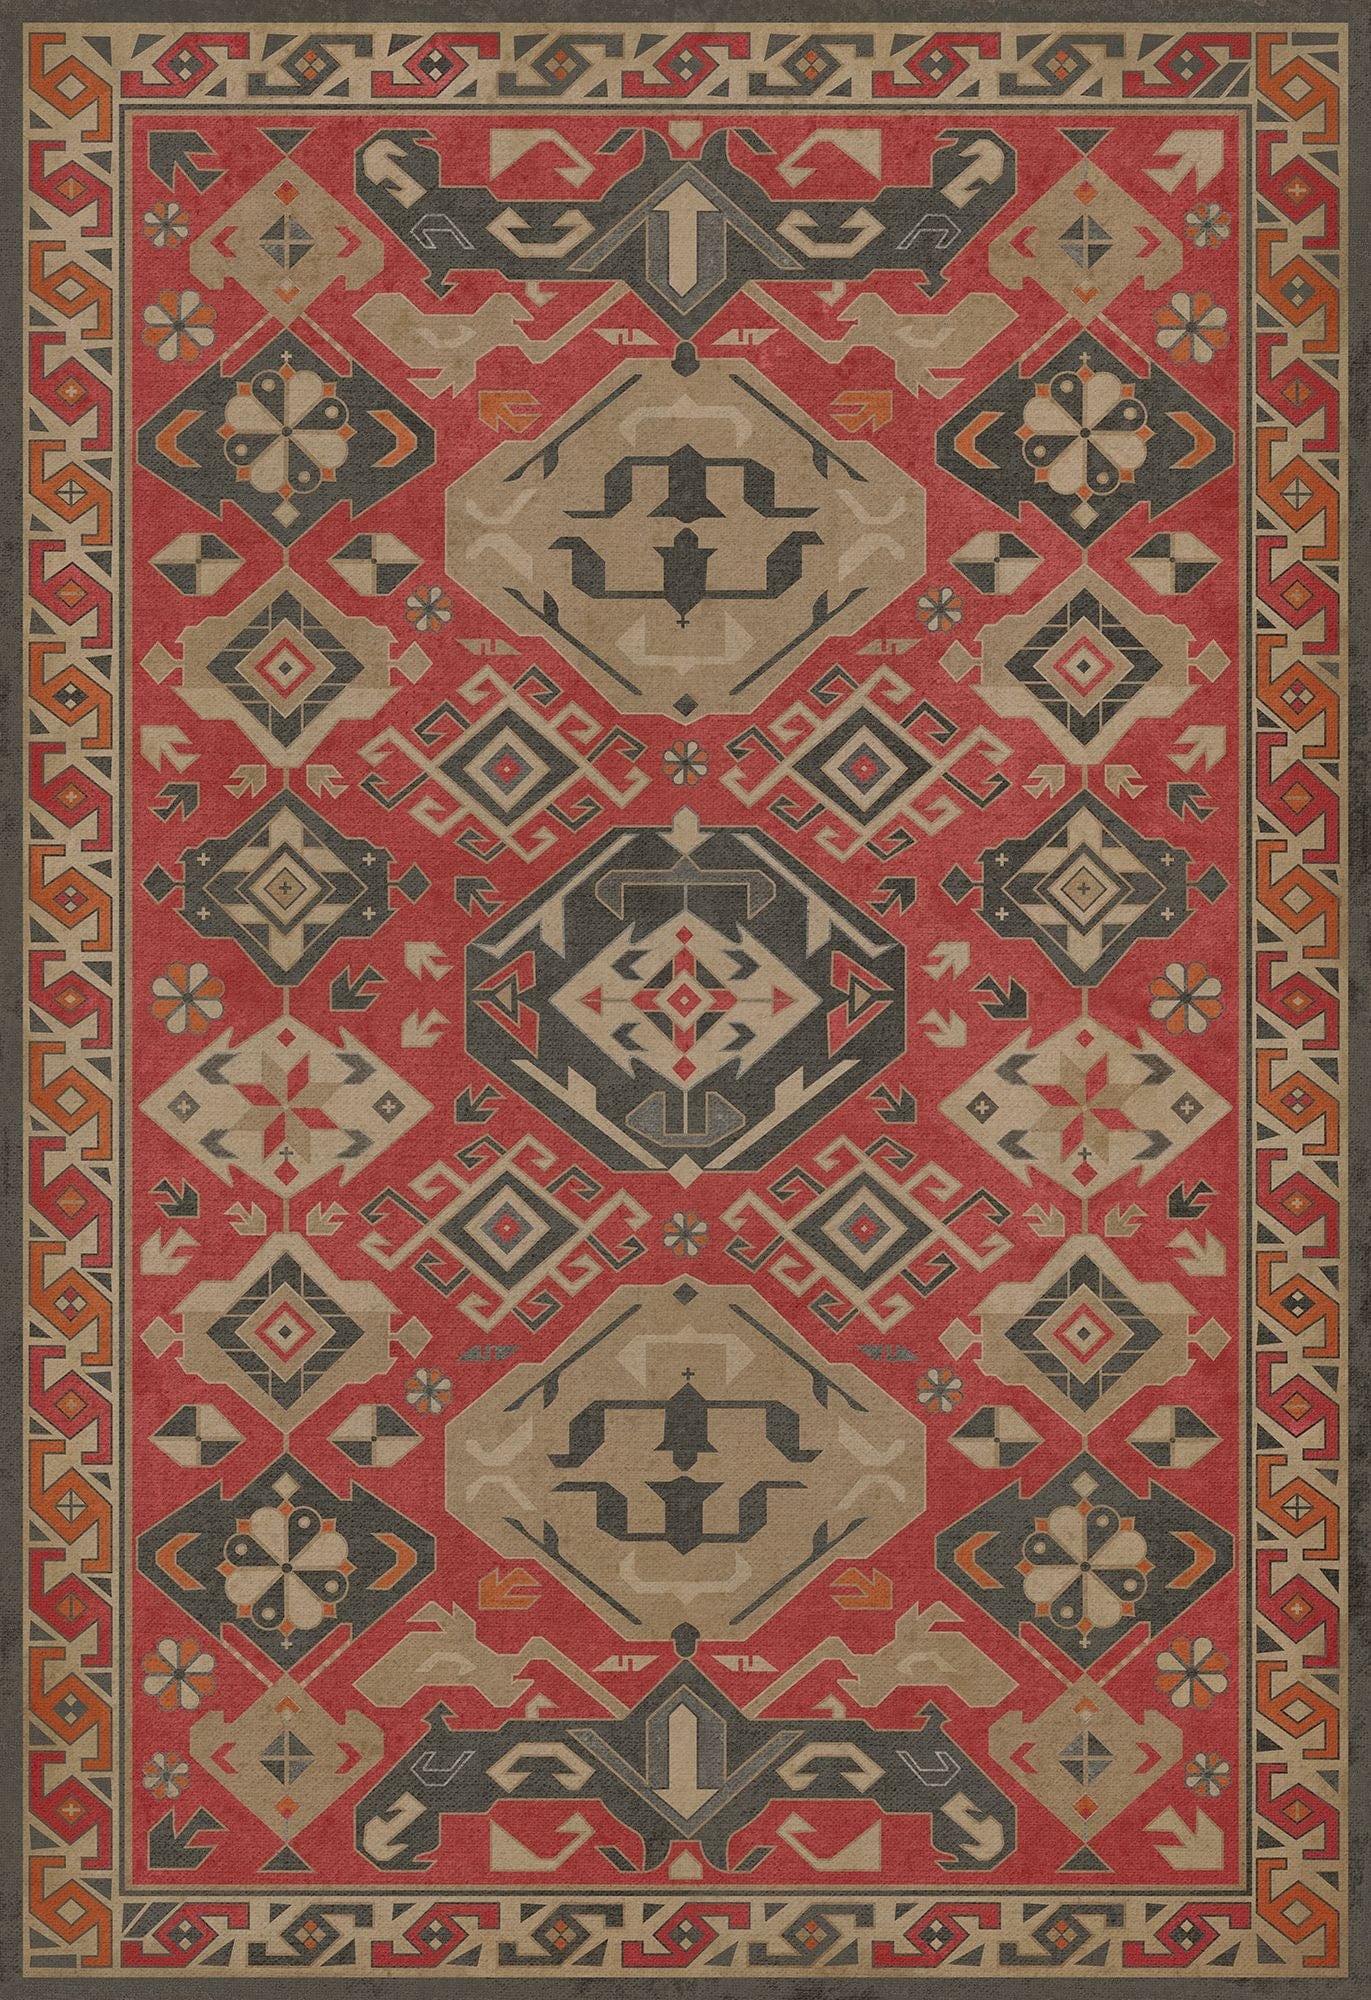 Spicher and Company Classic Vintage Vinyl Pattern 07 Area Rugs